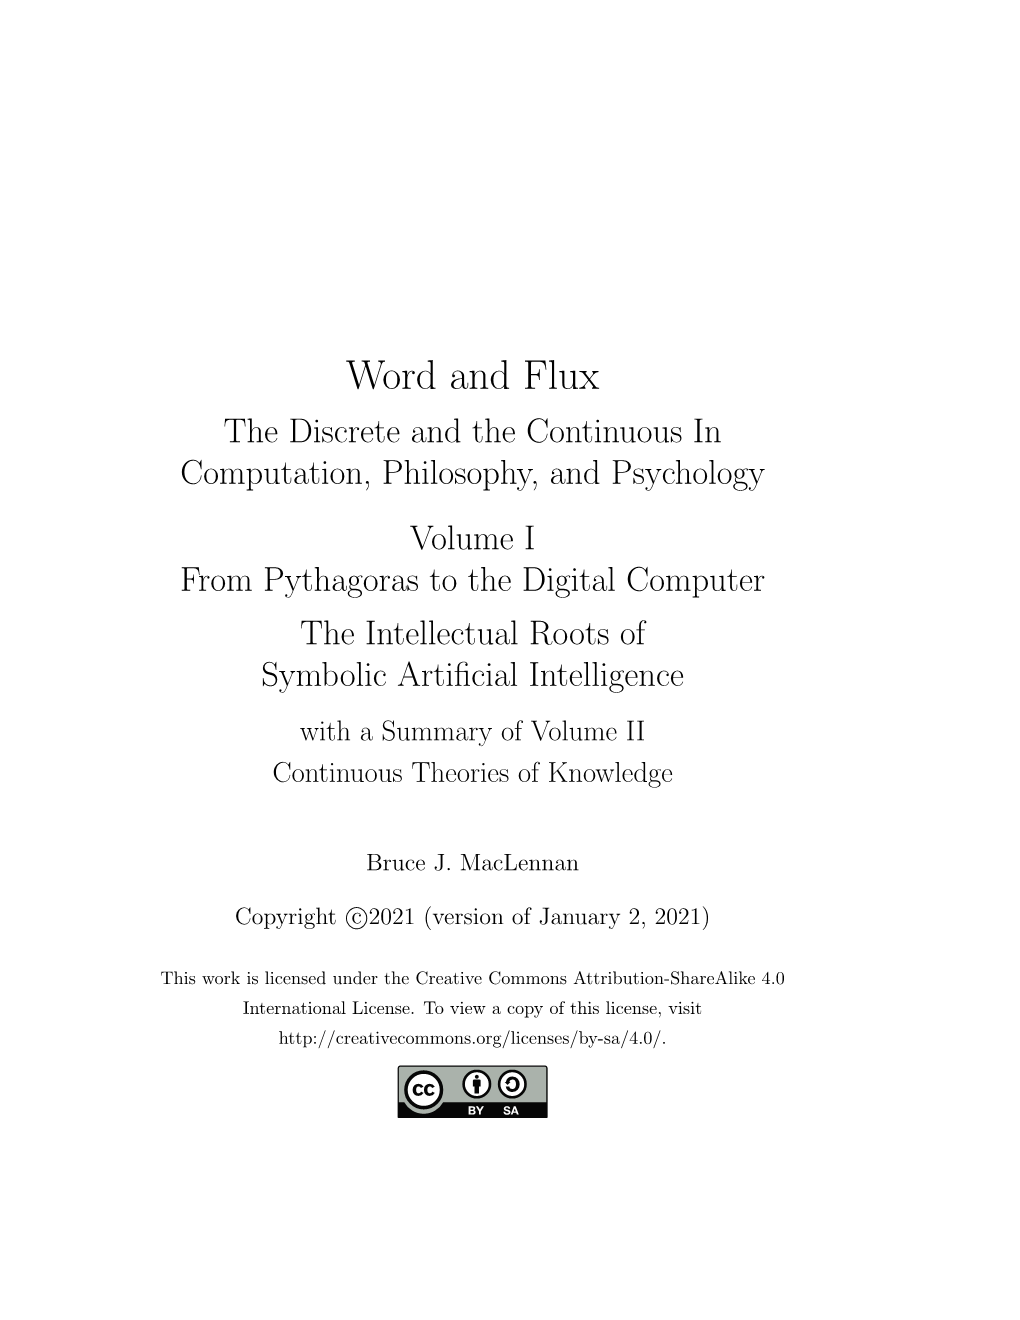 Word and Flux: the Discrete and the Continuous in Computation